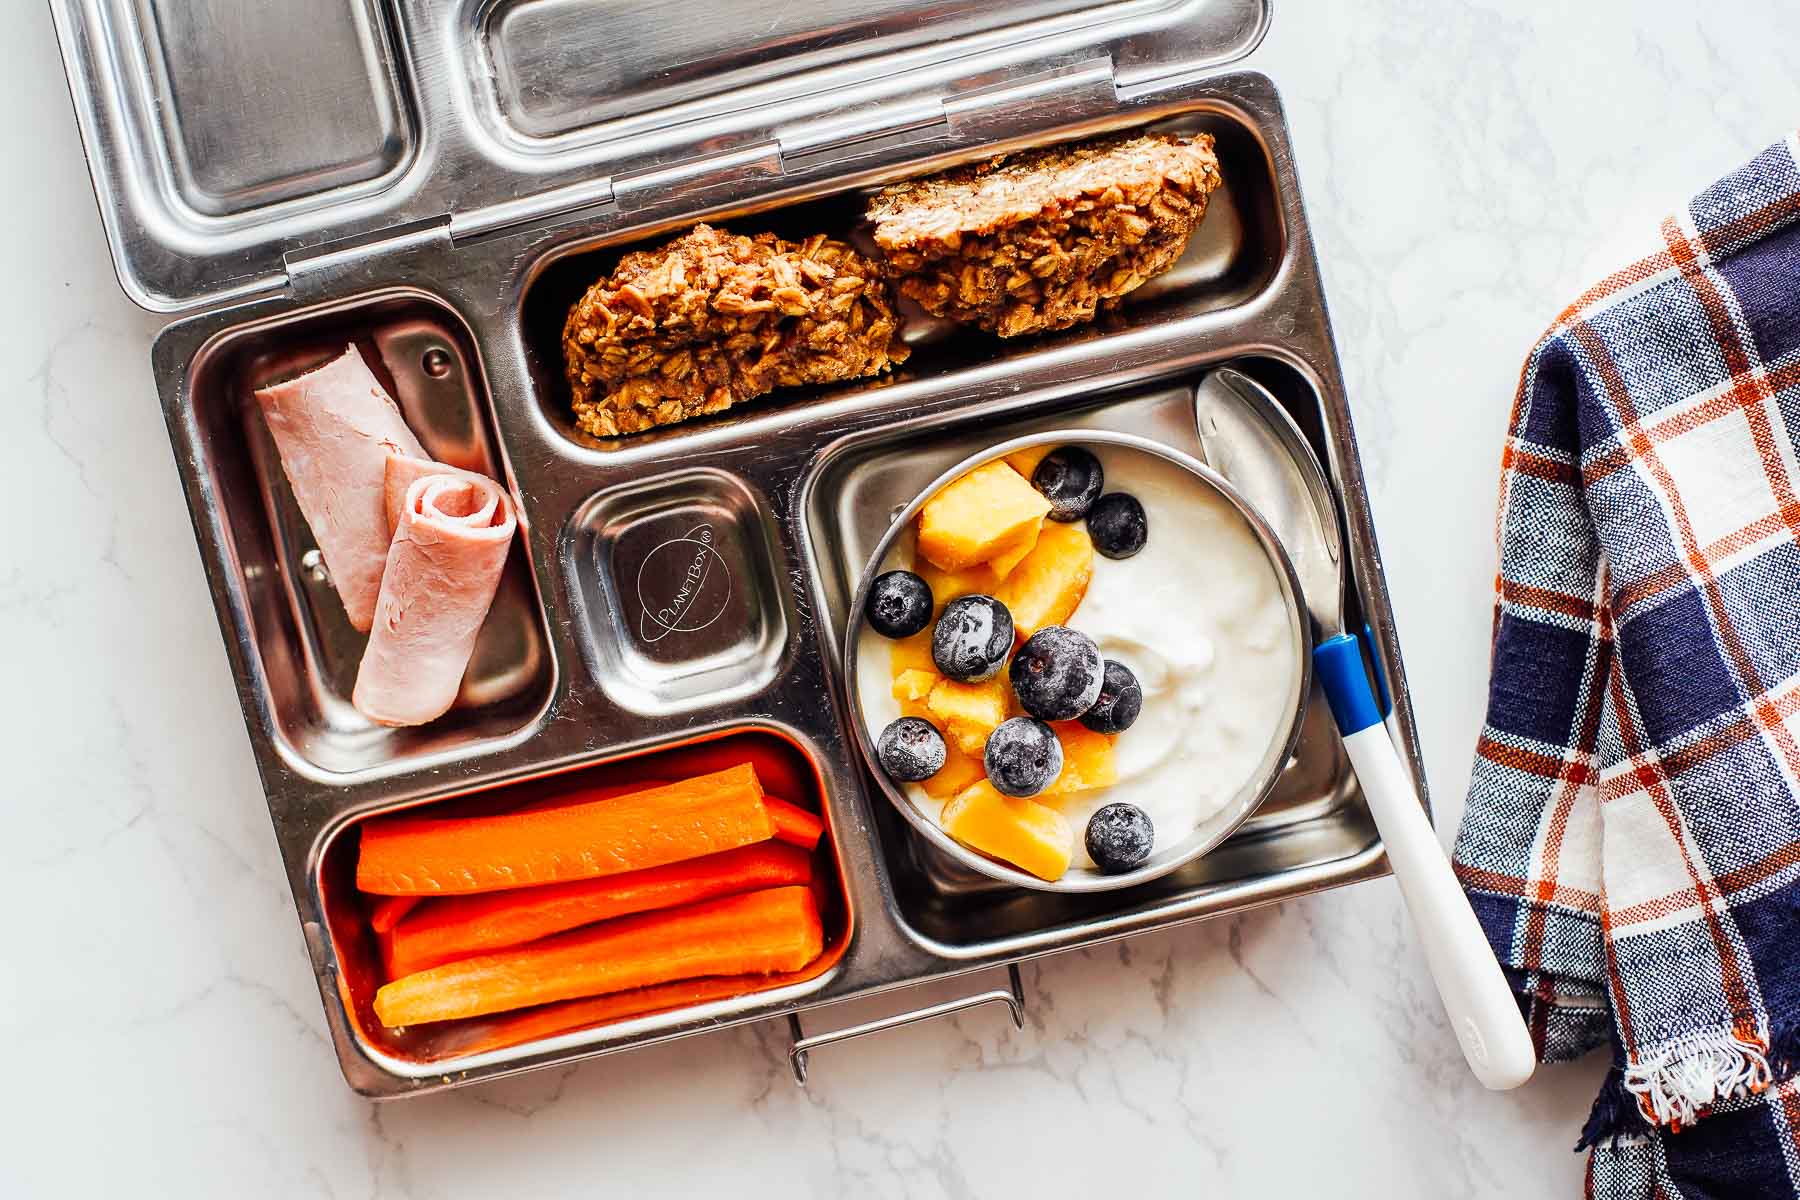 Yogurt with fruit, carrots, ham roll ups, and breakfast cookie in a lunchbox.